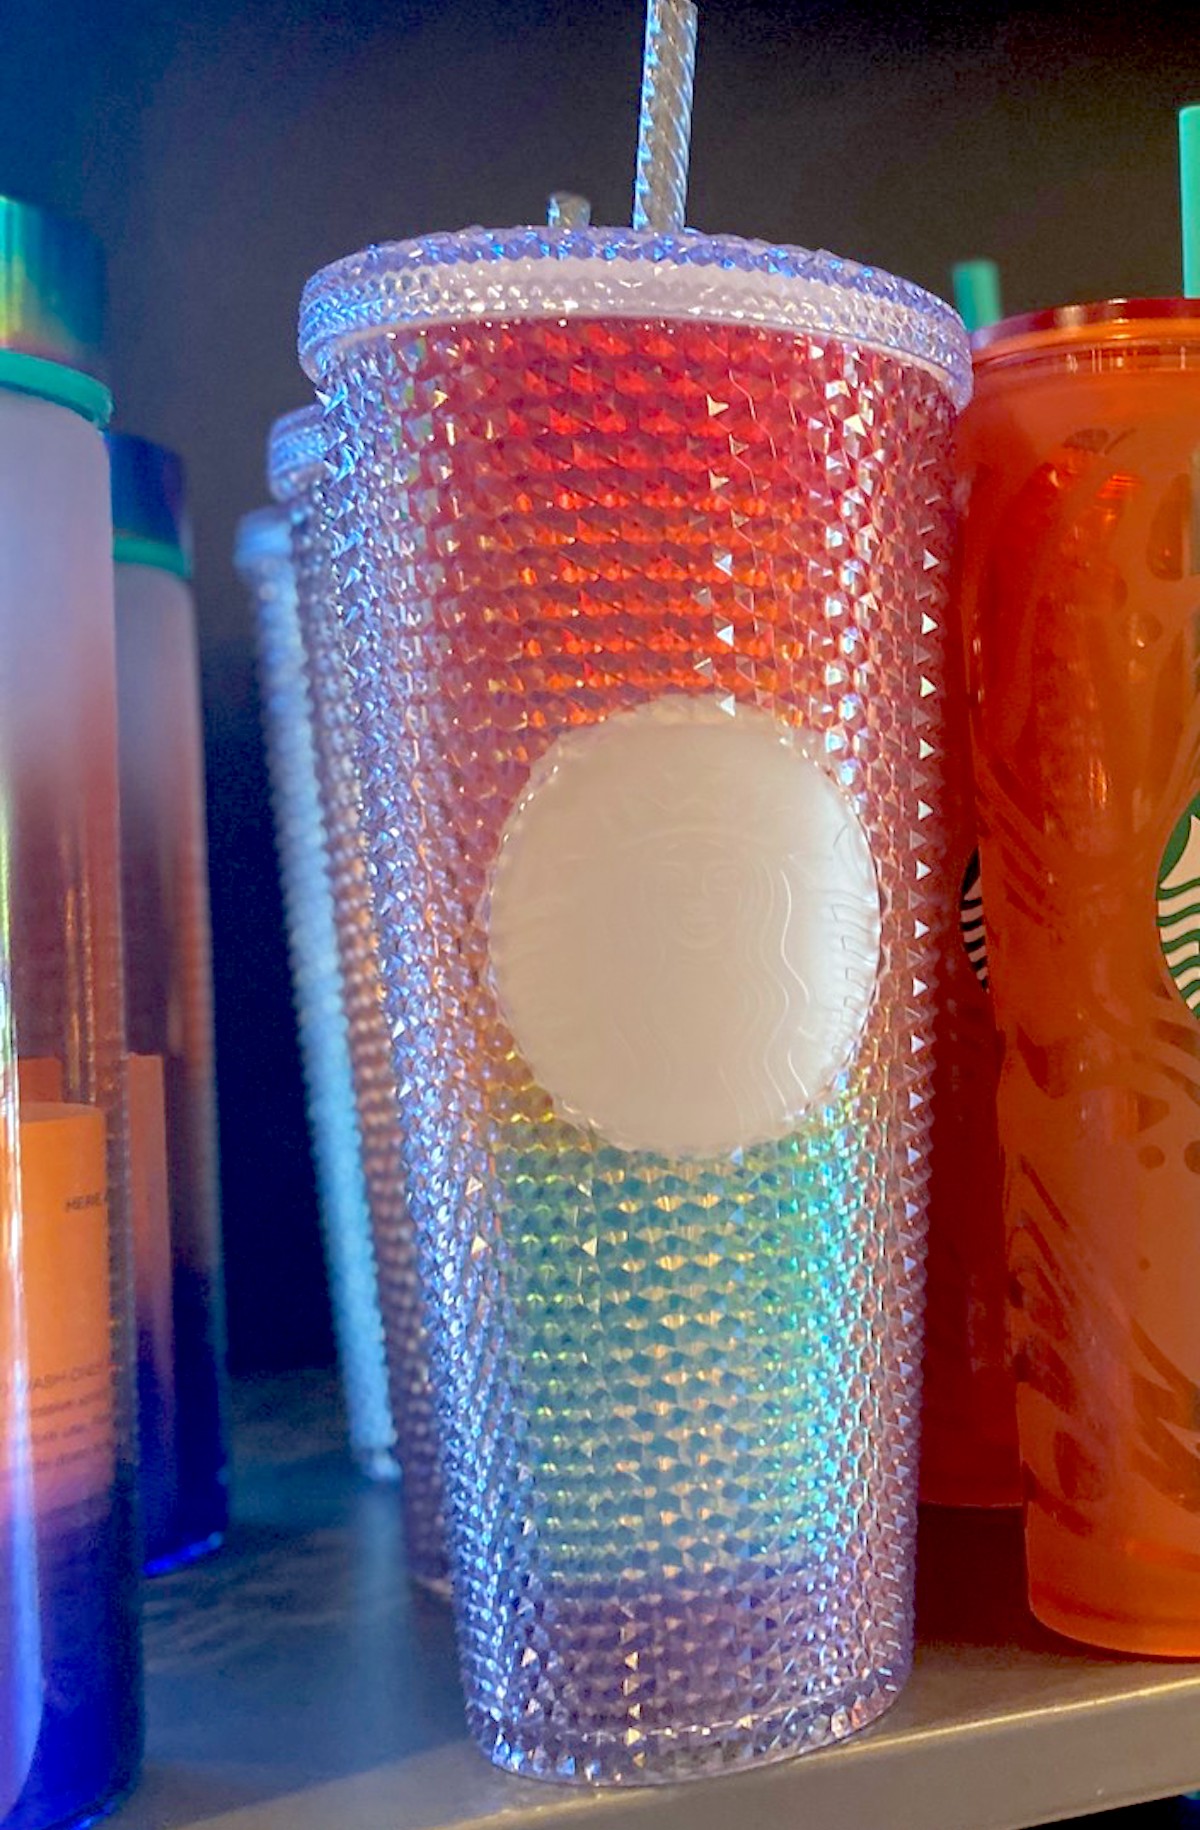 starbucks new cups march